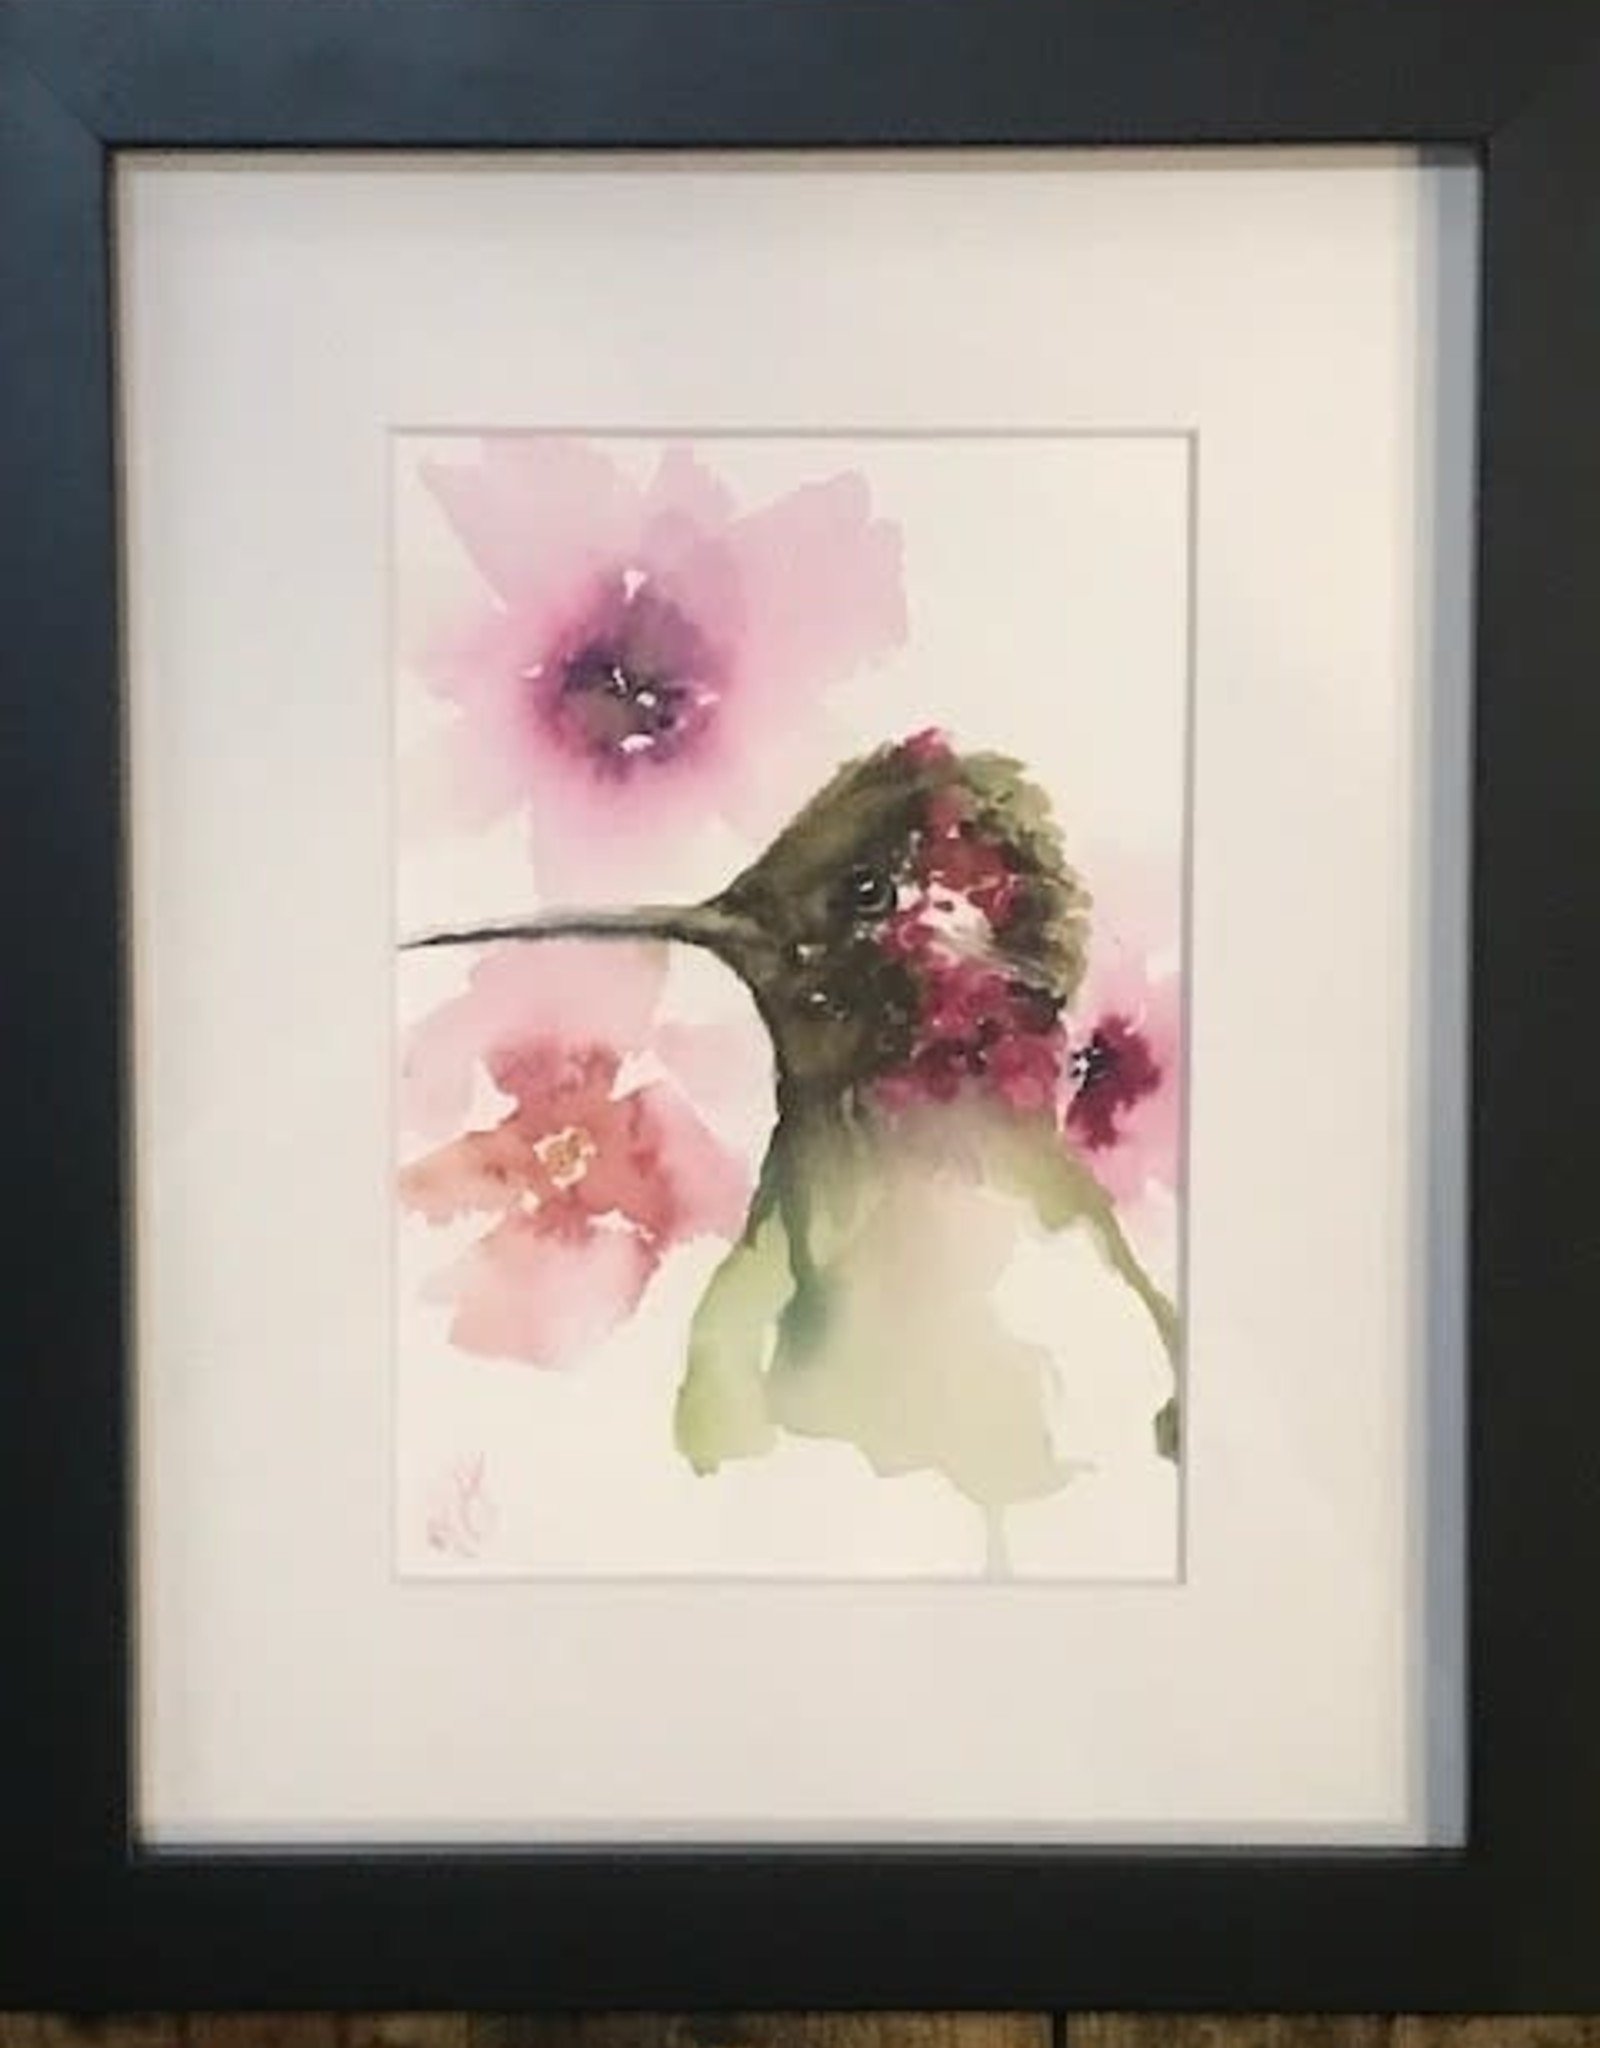 "Hummingbird with Flowers" - Michelle Detering Original - Framed Watercolor 11.5x9.5